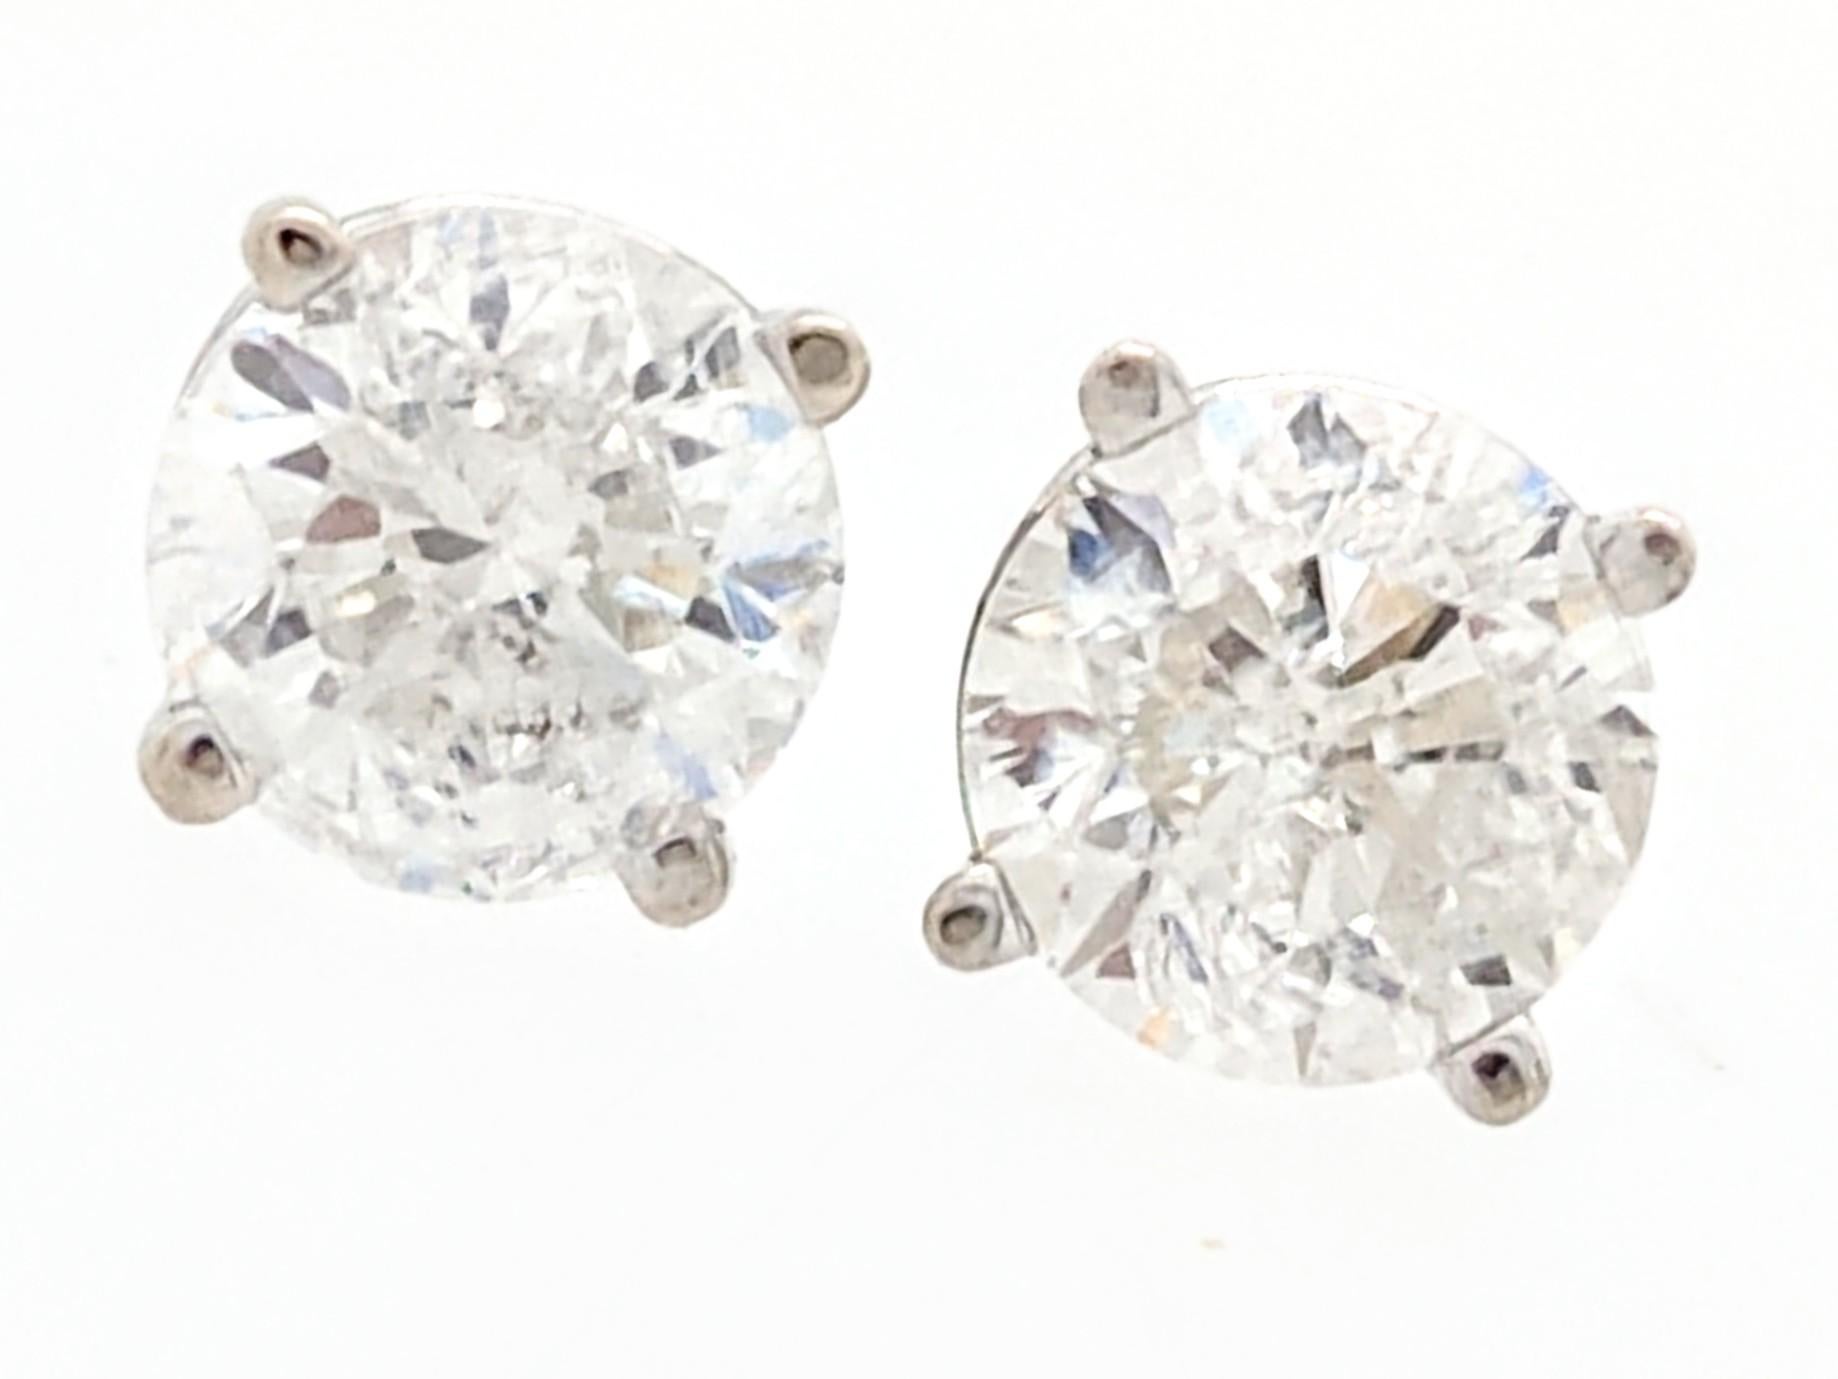 You are viewing a Beautiful Pair of Diamond Stud Earrings. These earrings are crafted from 14k white gold and weighs .9 grams. Each earring features (1) .37ct natural round diamond which measures approximately 4.6mm for an estimated .75tcw. The